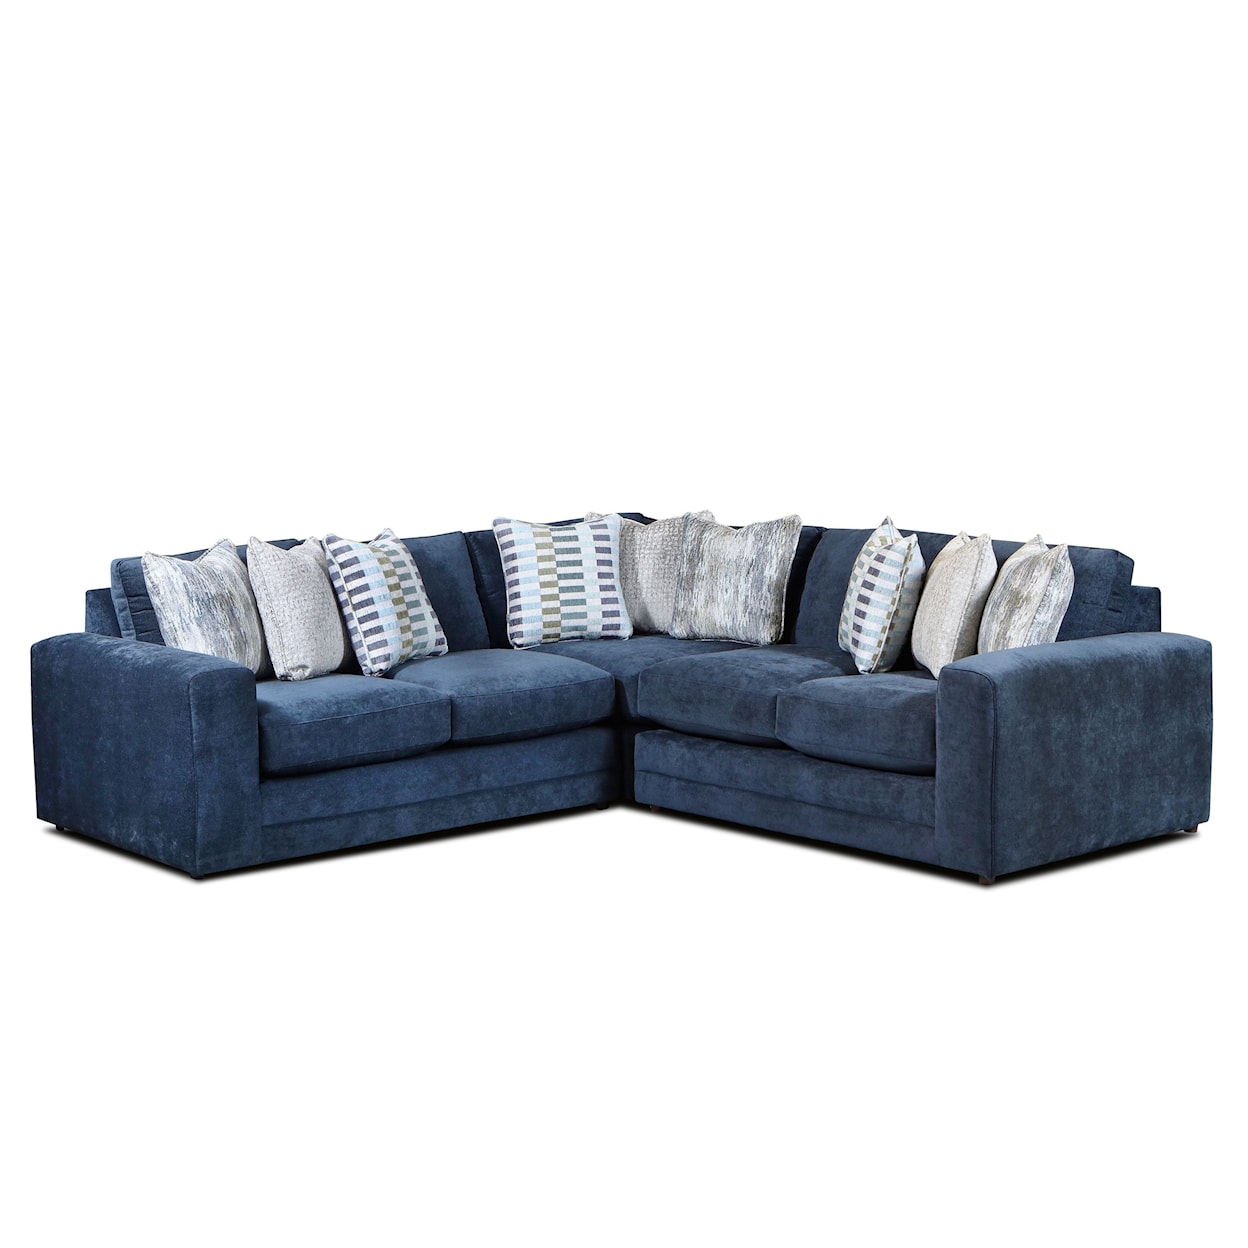 Fusion Furniture 7000 ELISE INK Sectional Sofas